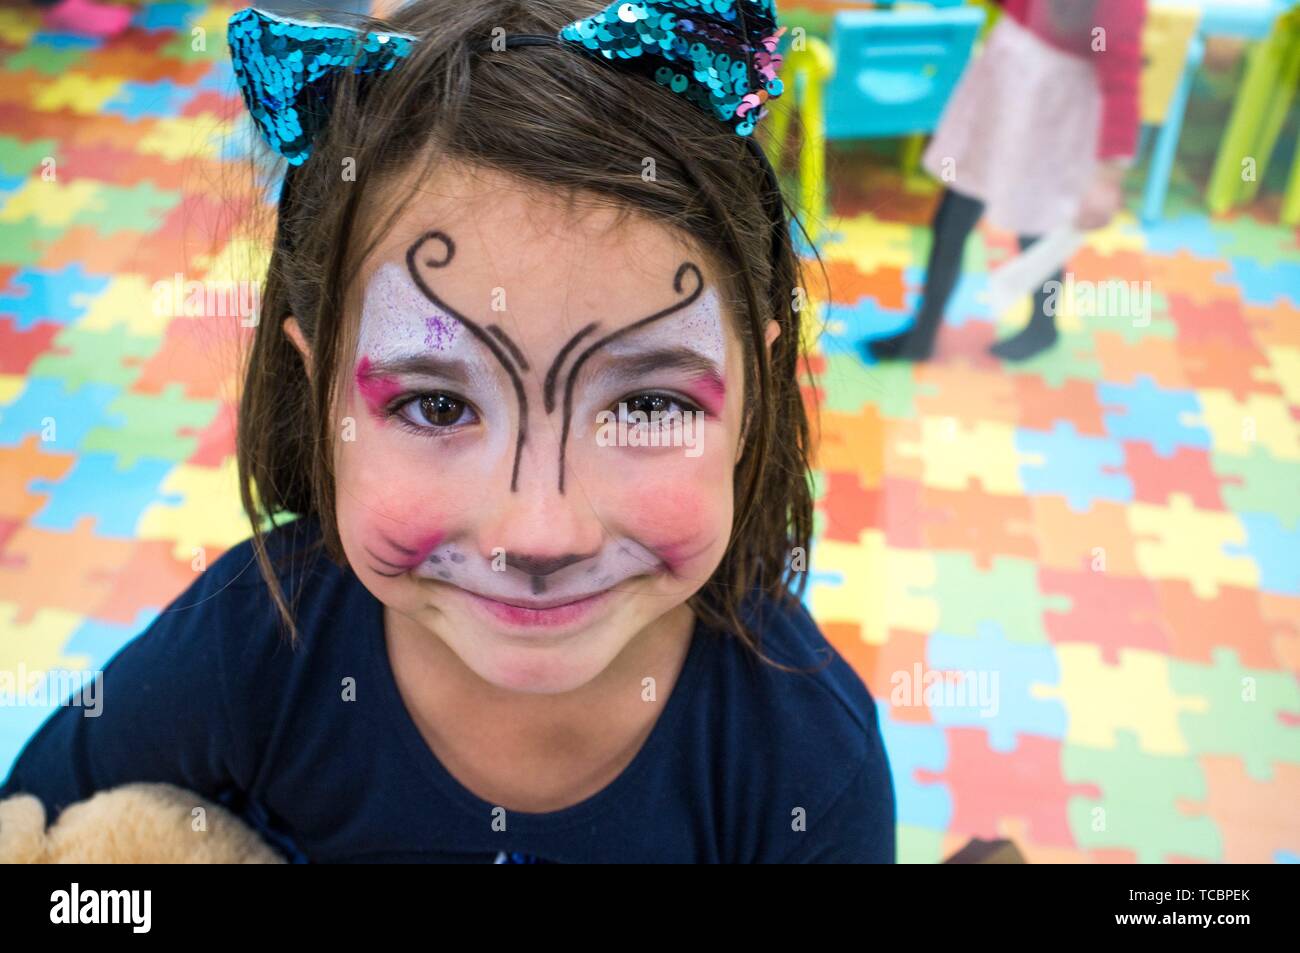 Child girl posing face painted during at Children Playroom. High angle shot. Stock Photo